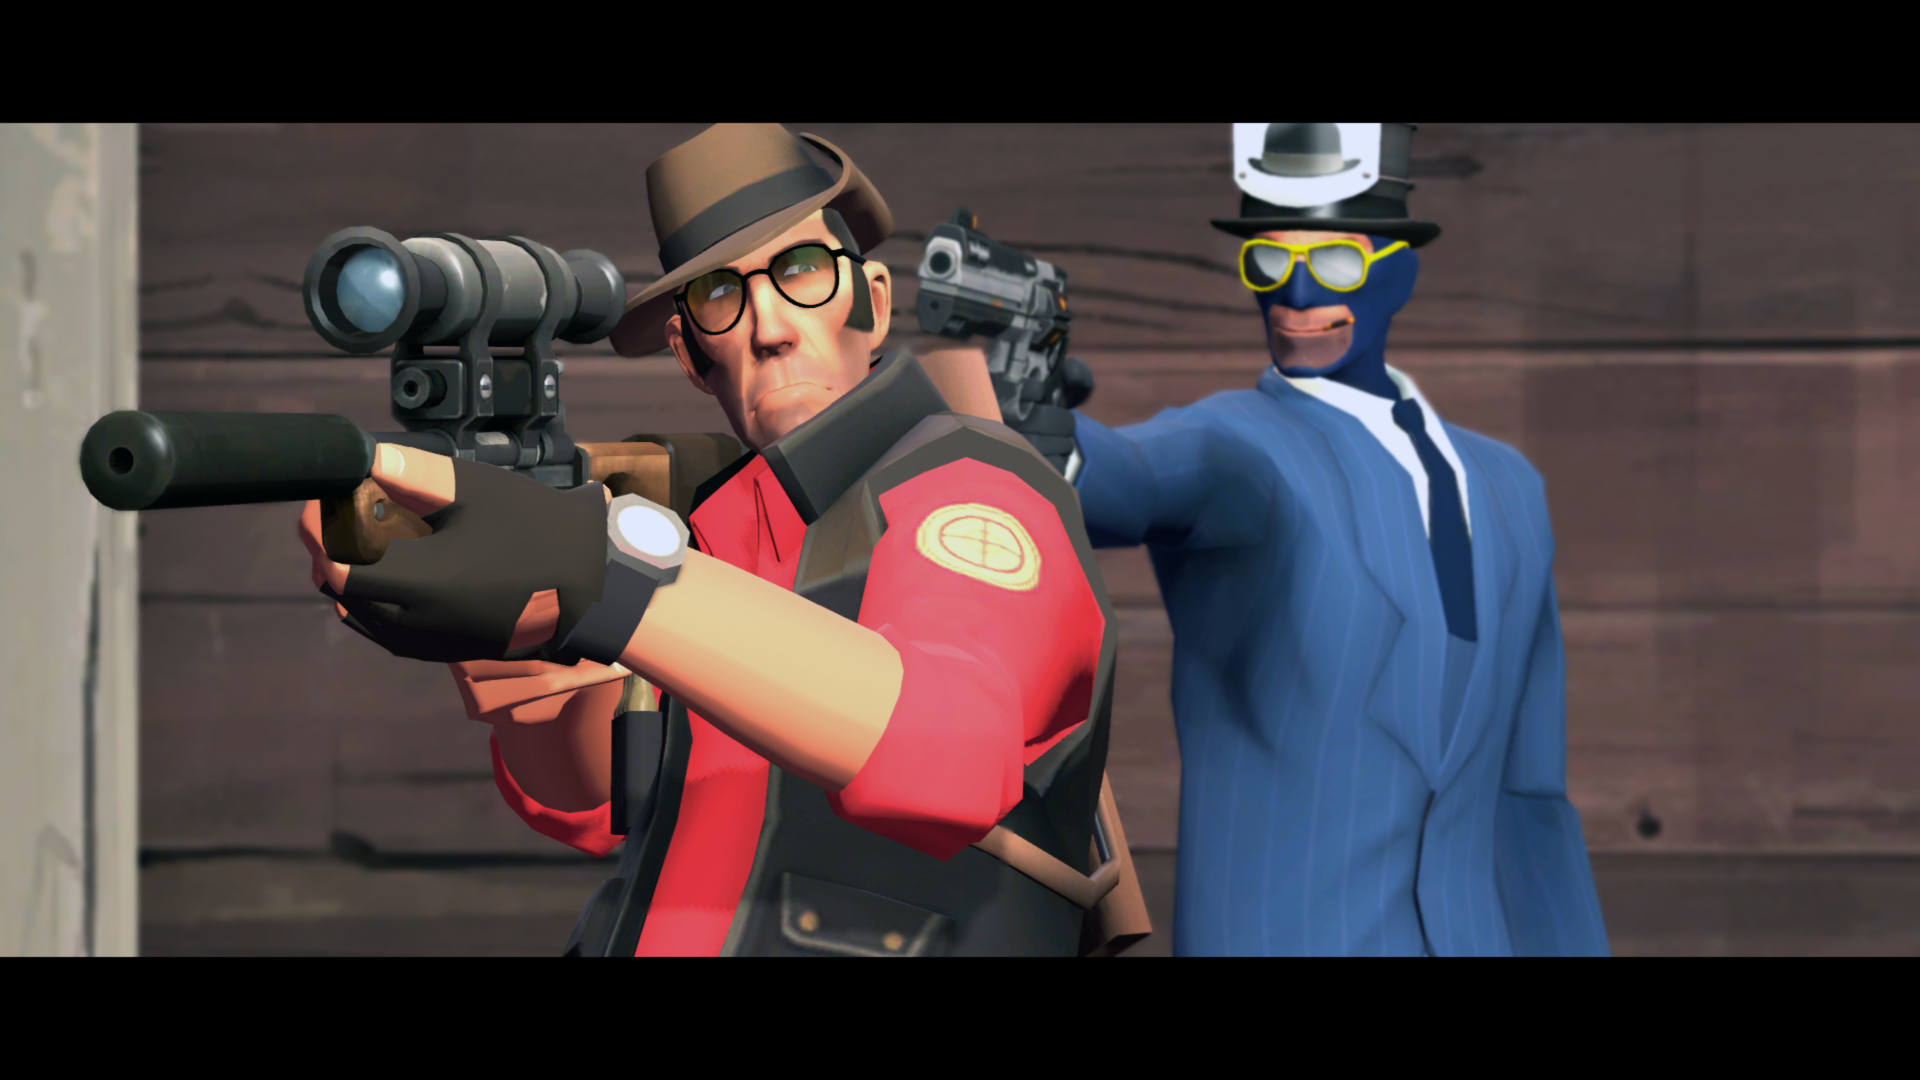 Right Behind You Team Fortress 2 Wallpaper Edit By Datryancross On Deviantart